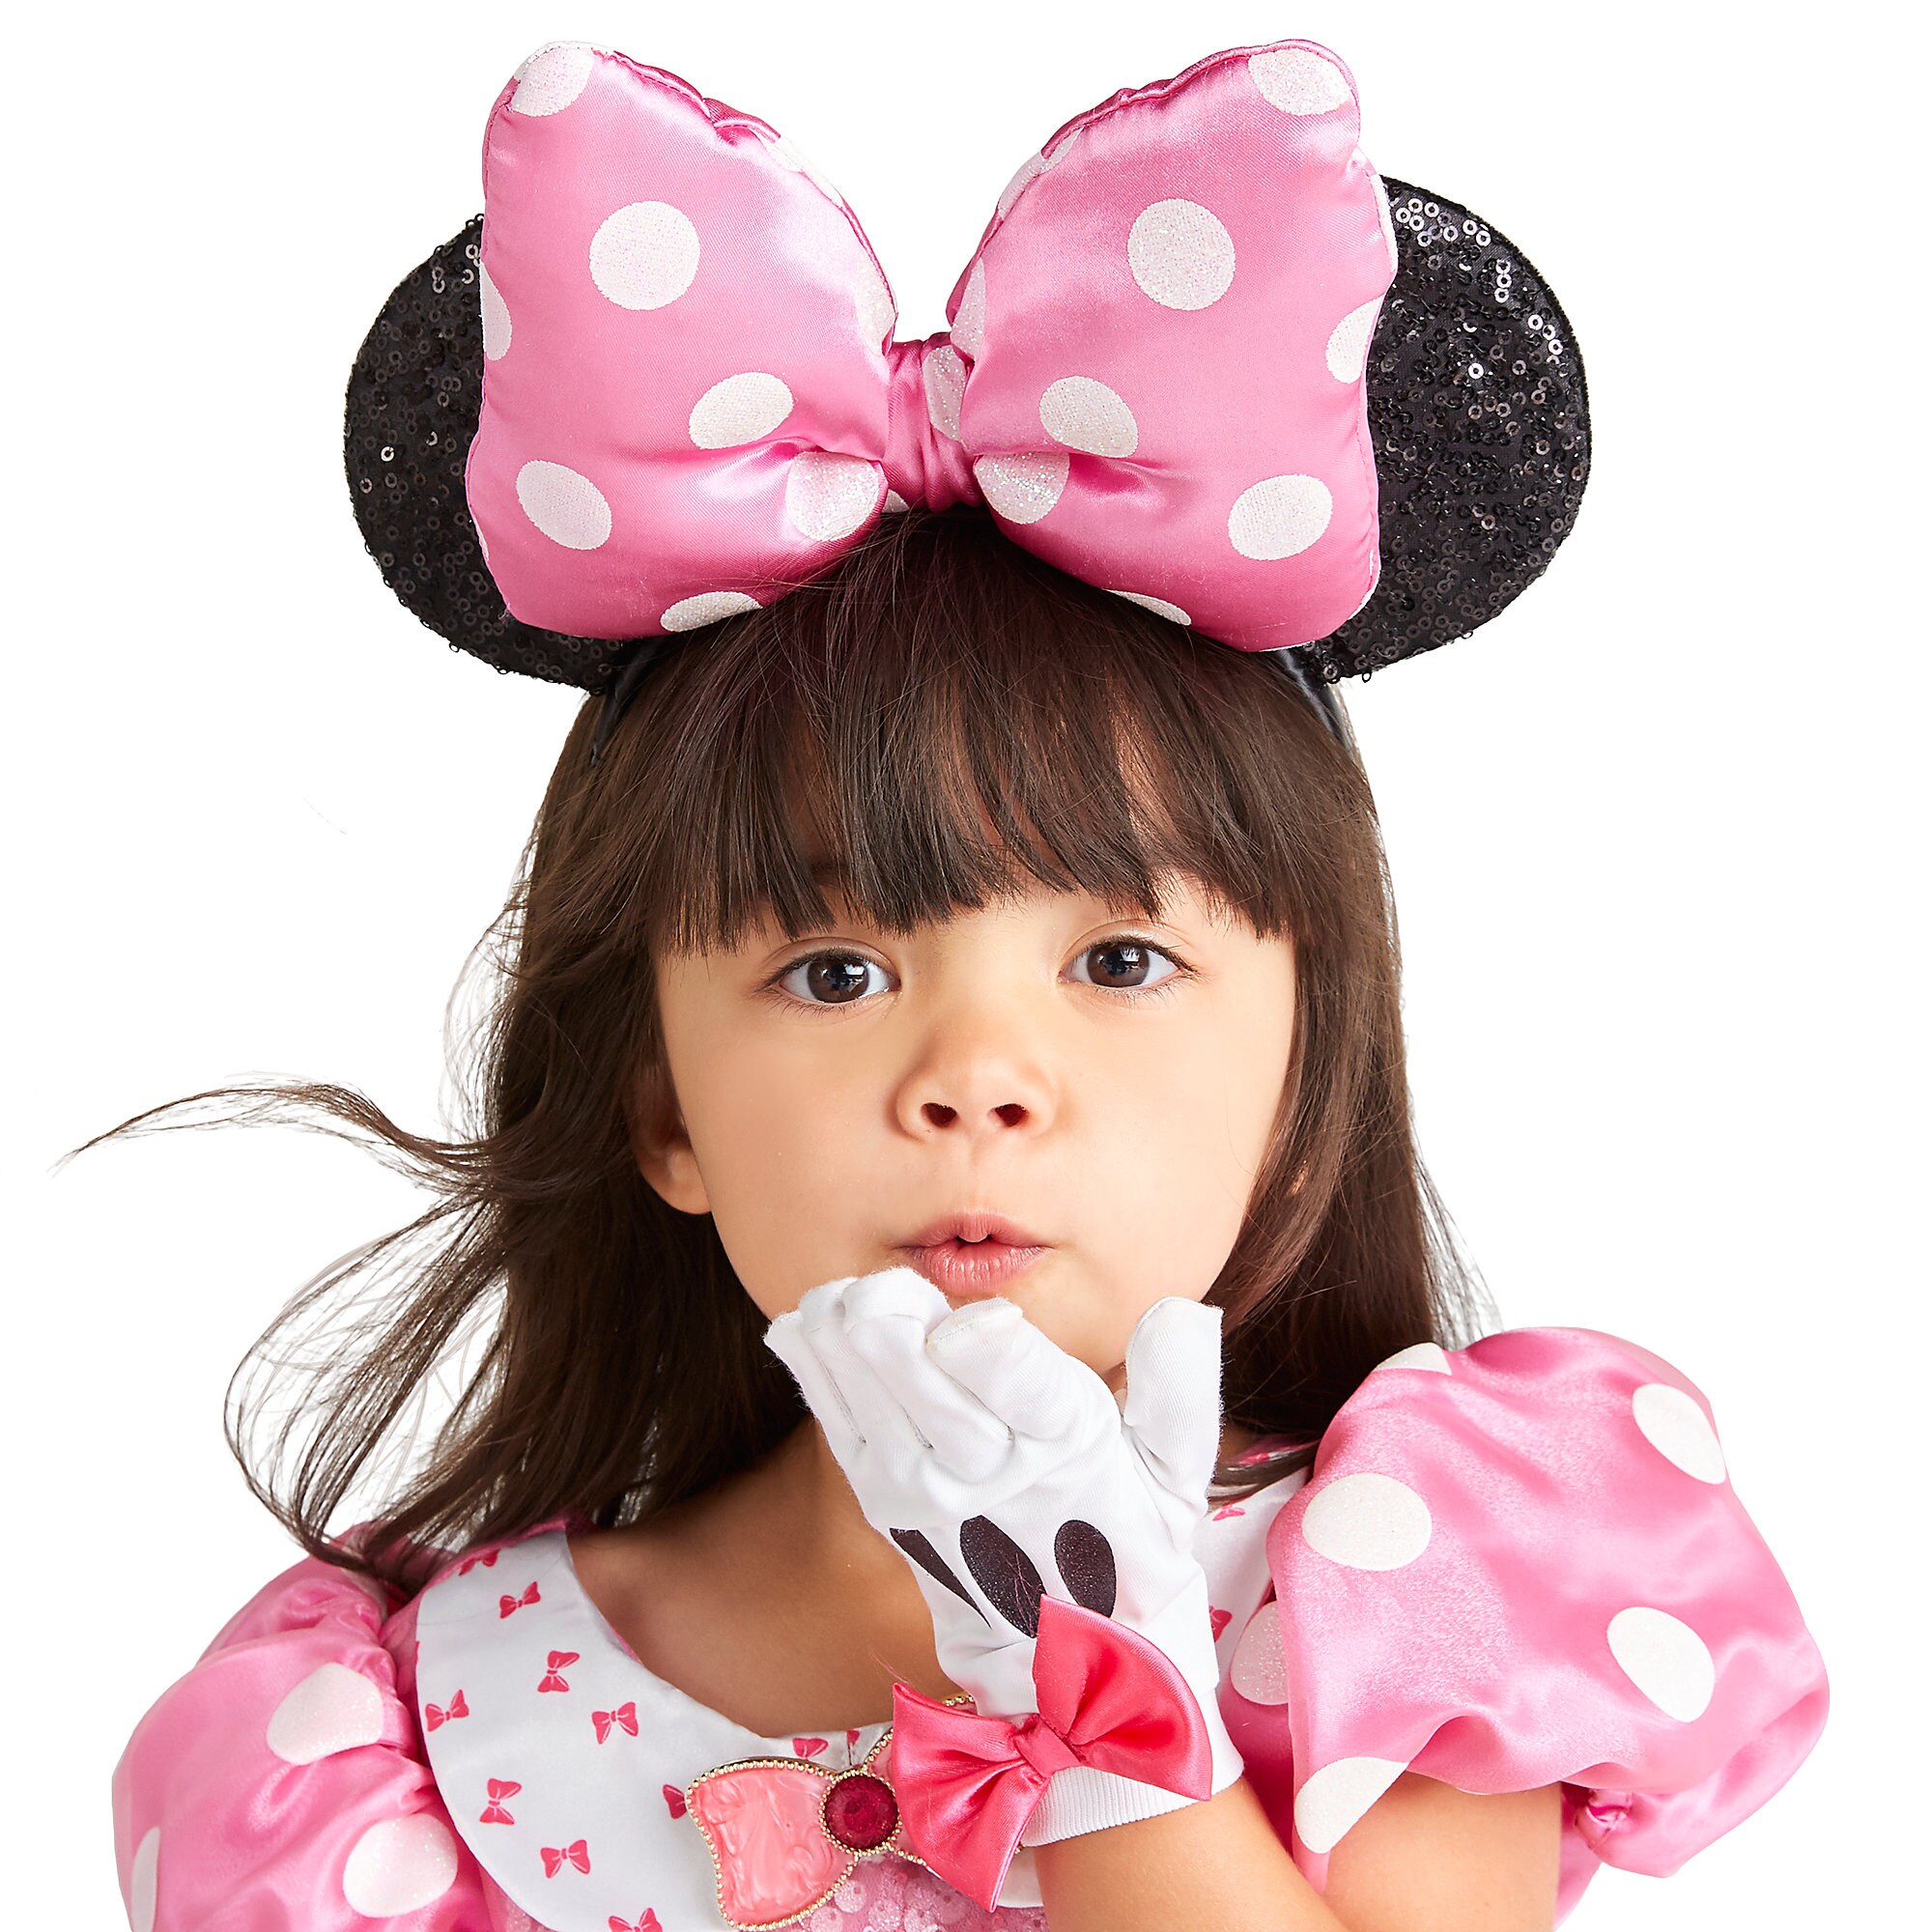 Minnie Mouse Ear Headband for Kids - Pink